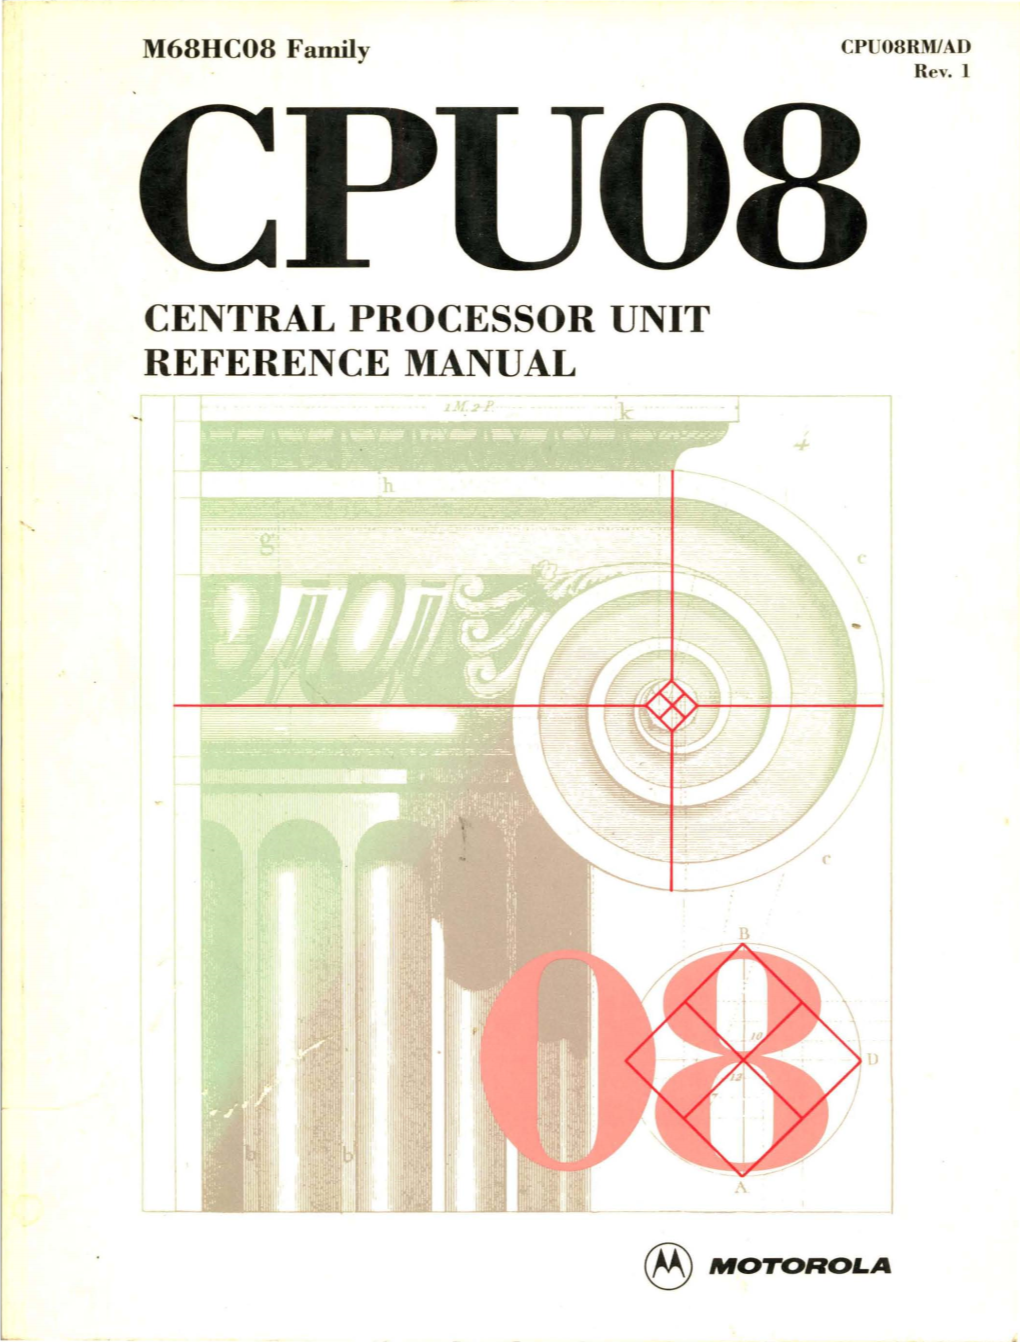 Central Processor Unit Reference Manual